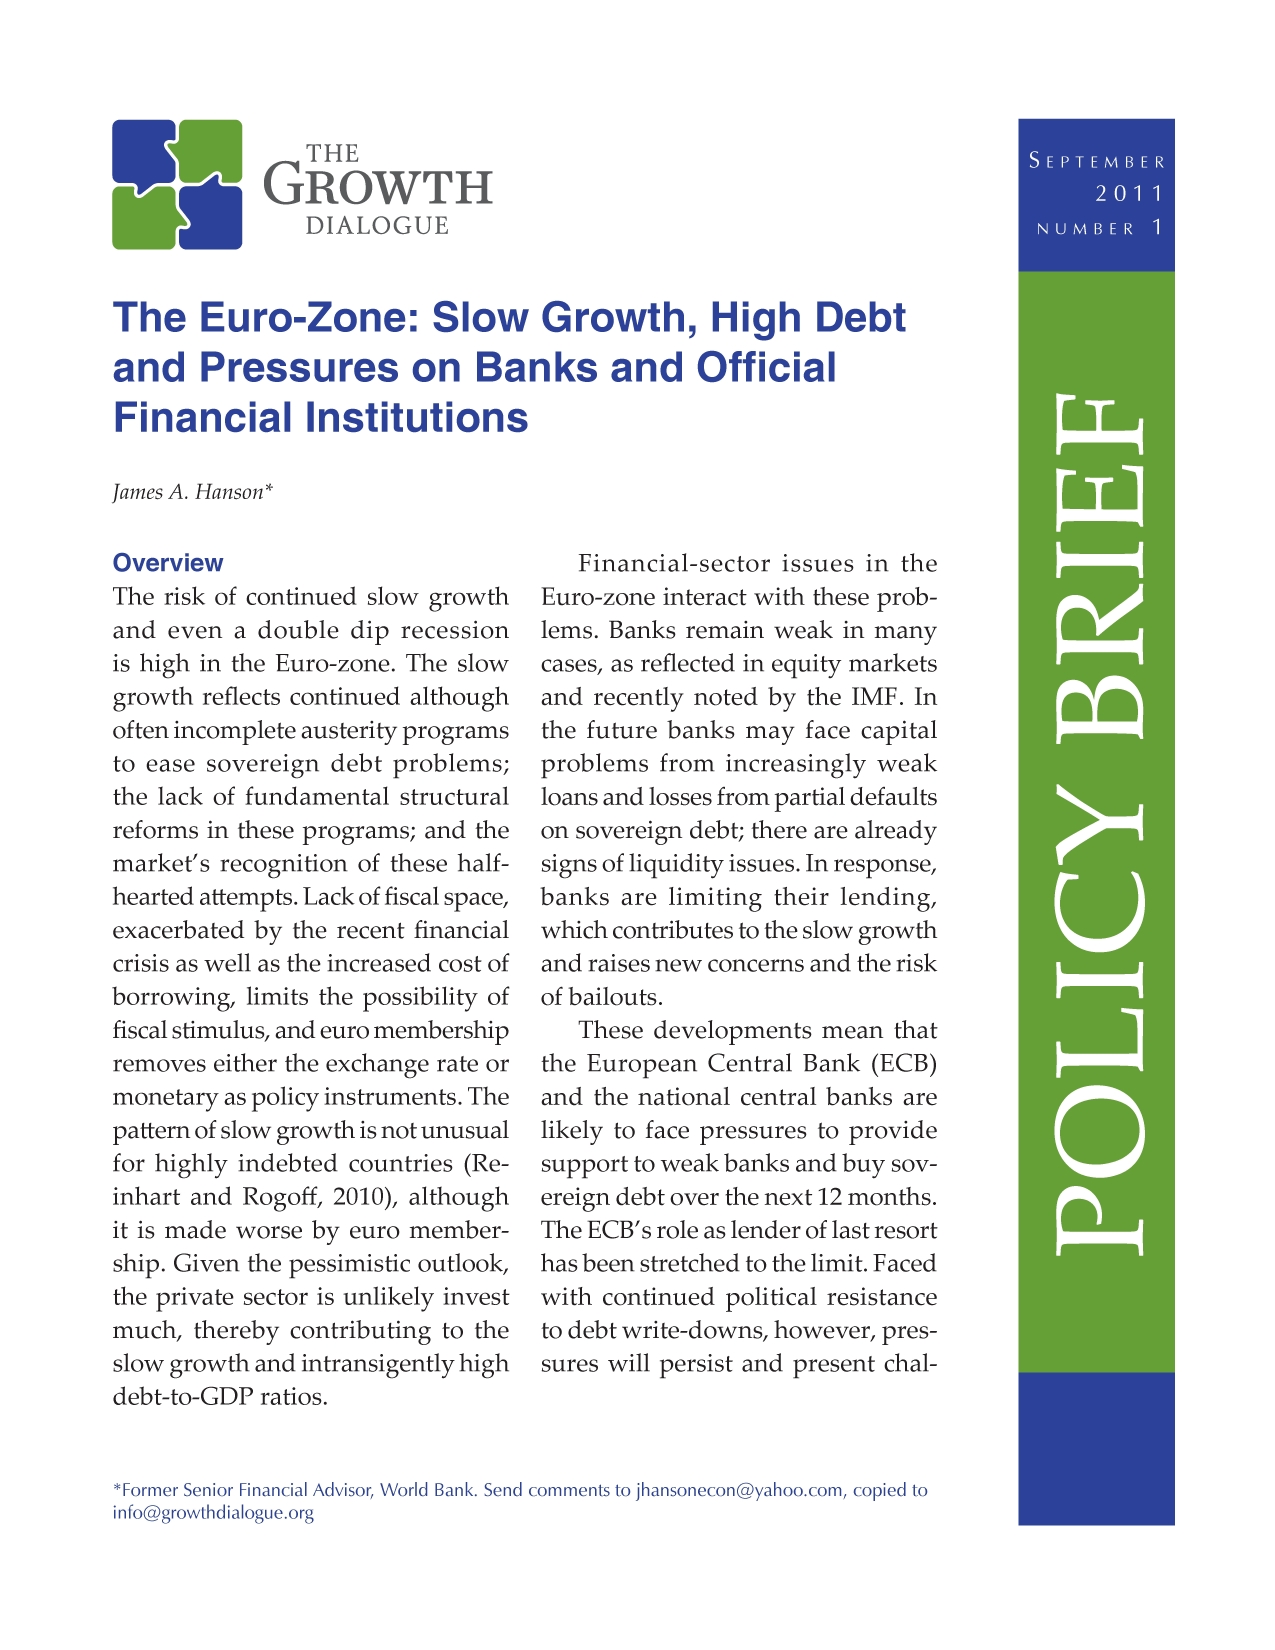 The Euro-Zone:  Slow Growth, High Debt and Pressures on Banks and Official Financial Institutions